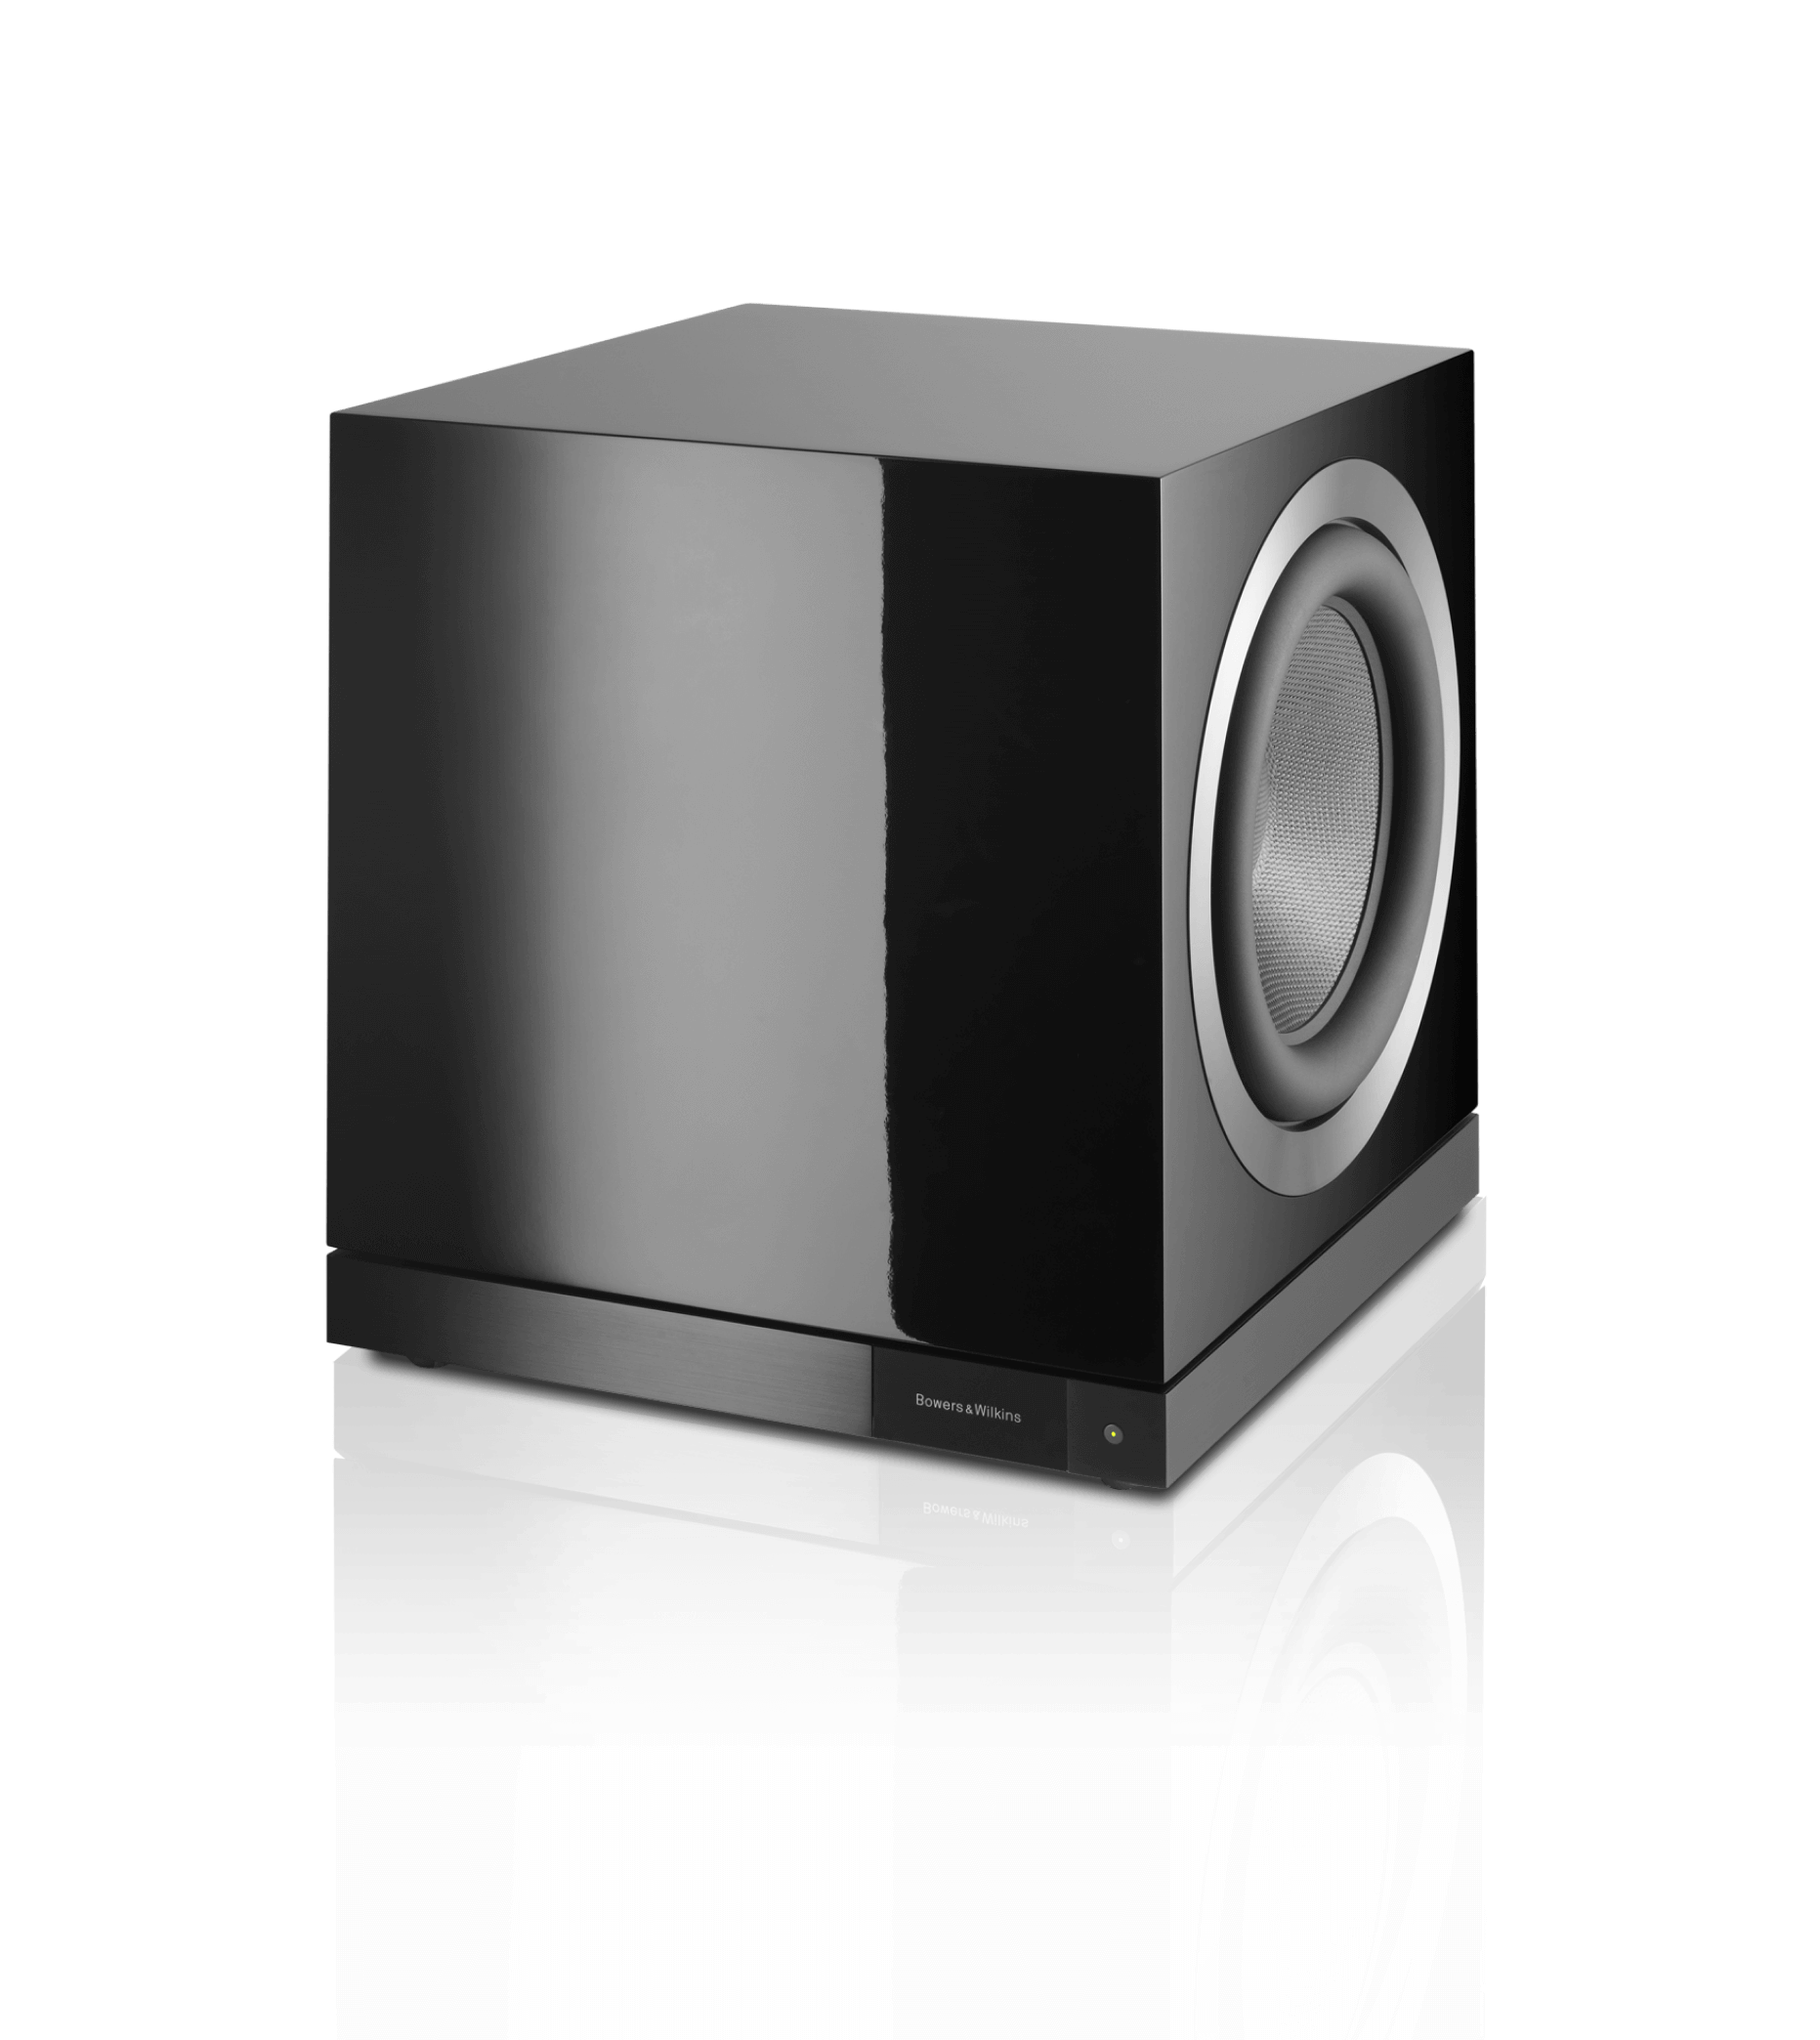 Combining 2000 watts of digital amplification with twin balanced Aerofoil™ drivers for incredible low-end power and speed, DB1D is the best Bowers & Wilkins subwoofer. Diamond bass Powerful amplification and ultra-fast Aerofoil™ drivers: a perfect partner for the acclaimed 800 Series Diamond speakers. 